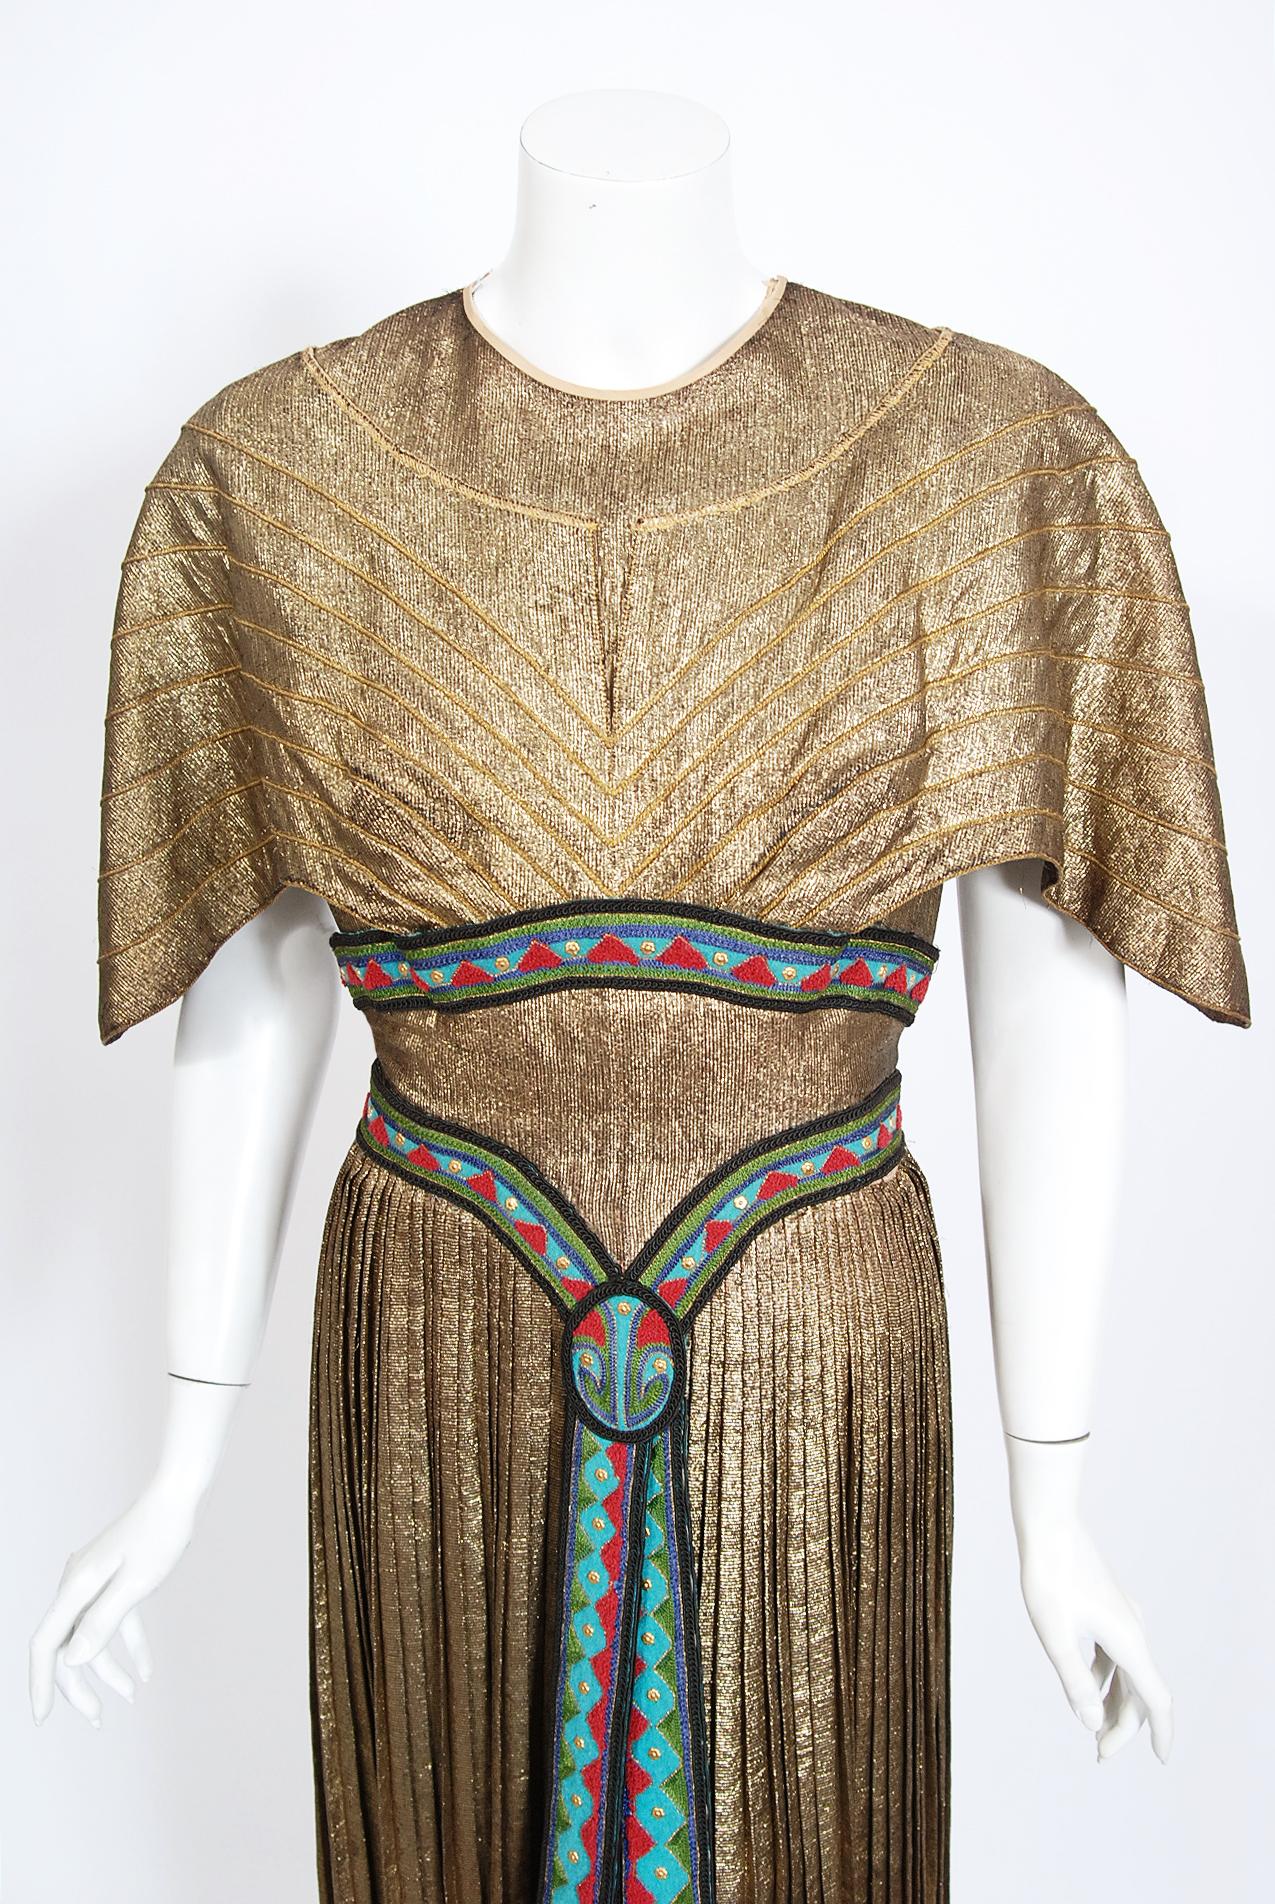 Women's Vintage 1951 Helen Rose Gold Lamé Egyptian 'The Great Caruso' Film-Worn Dress